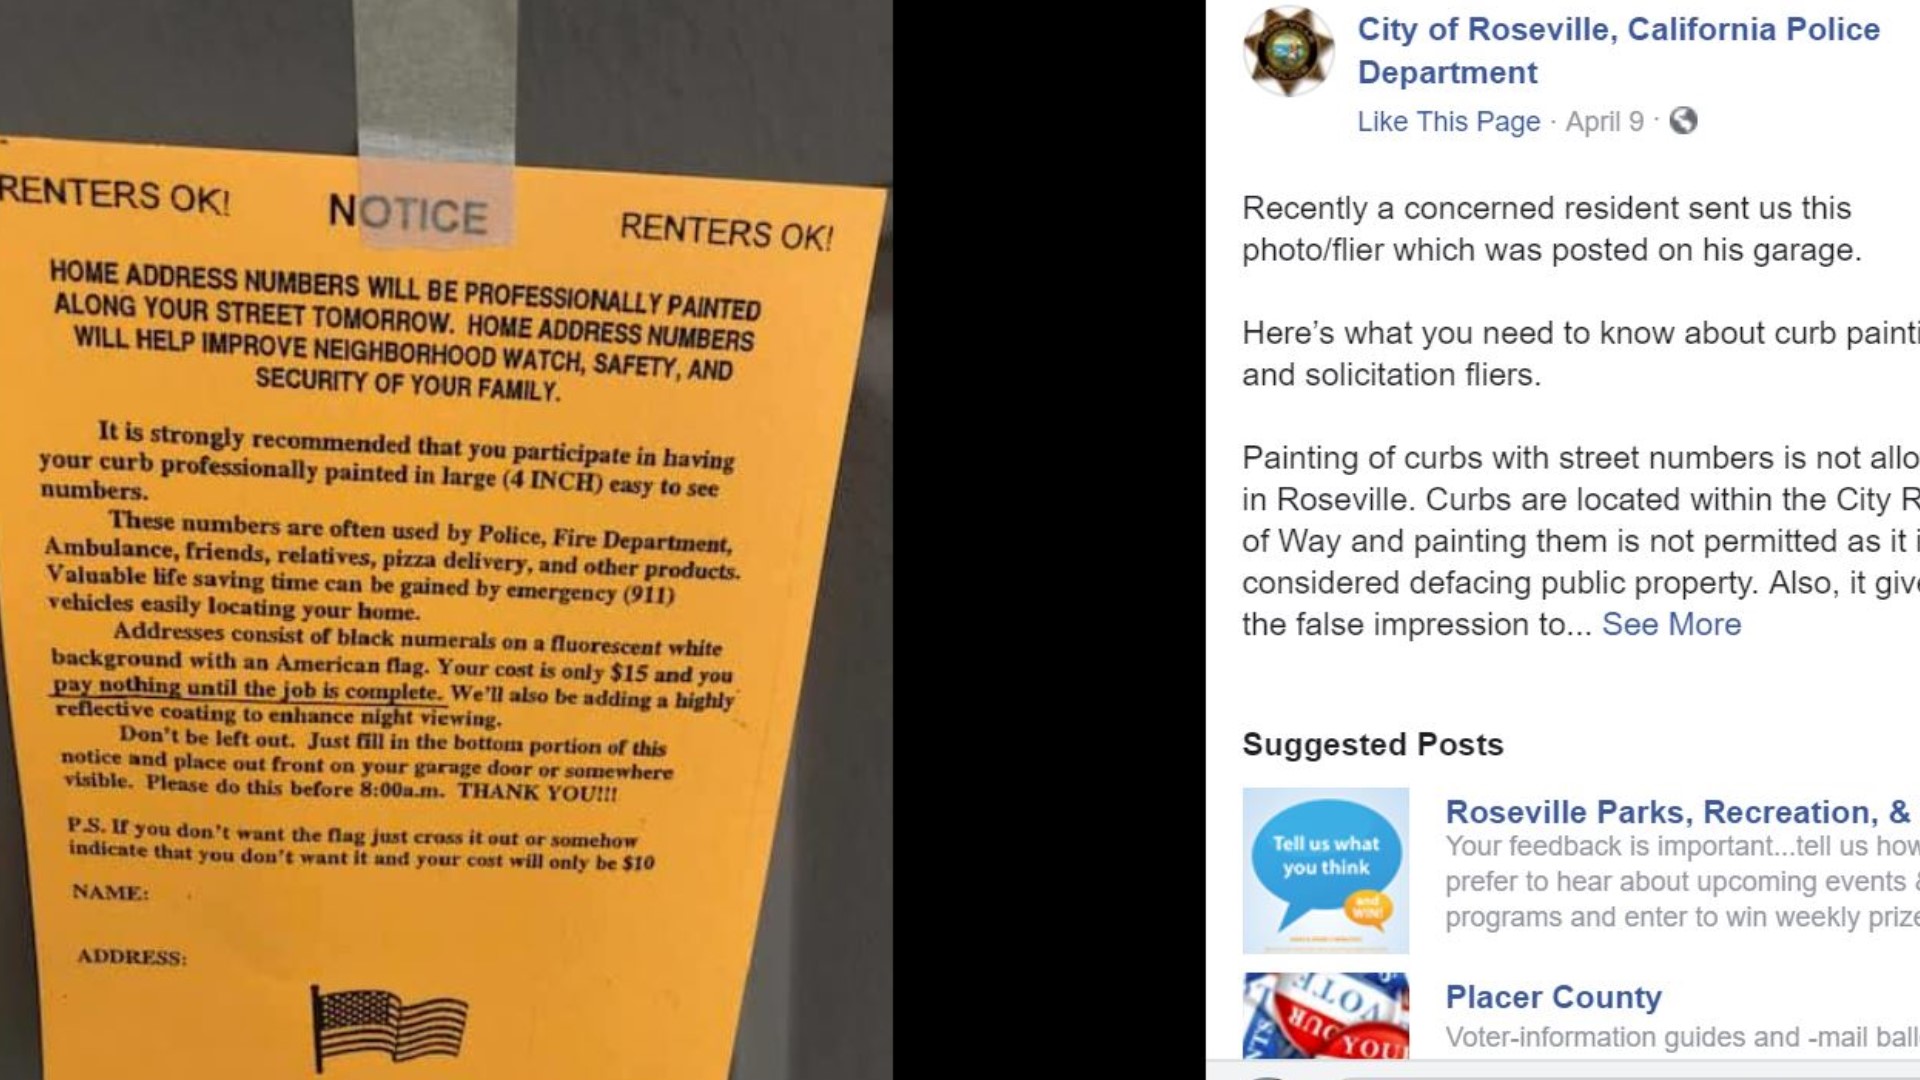 Roseville Police are warning people in the area about a curb painting flier.   Across the country, there have been stories of people distributing similar kinds of notices making it seem like homeowners need to comply.